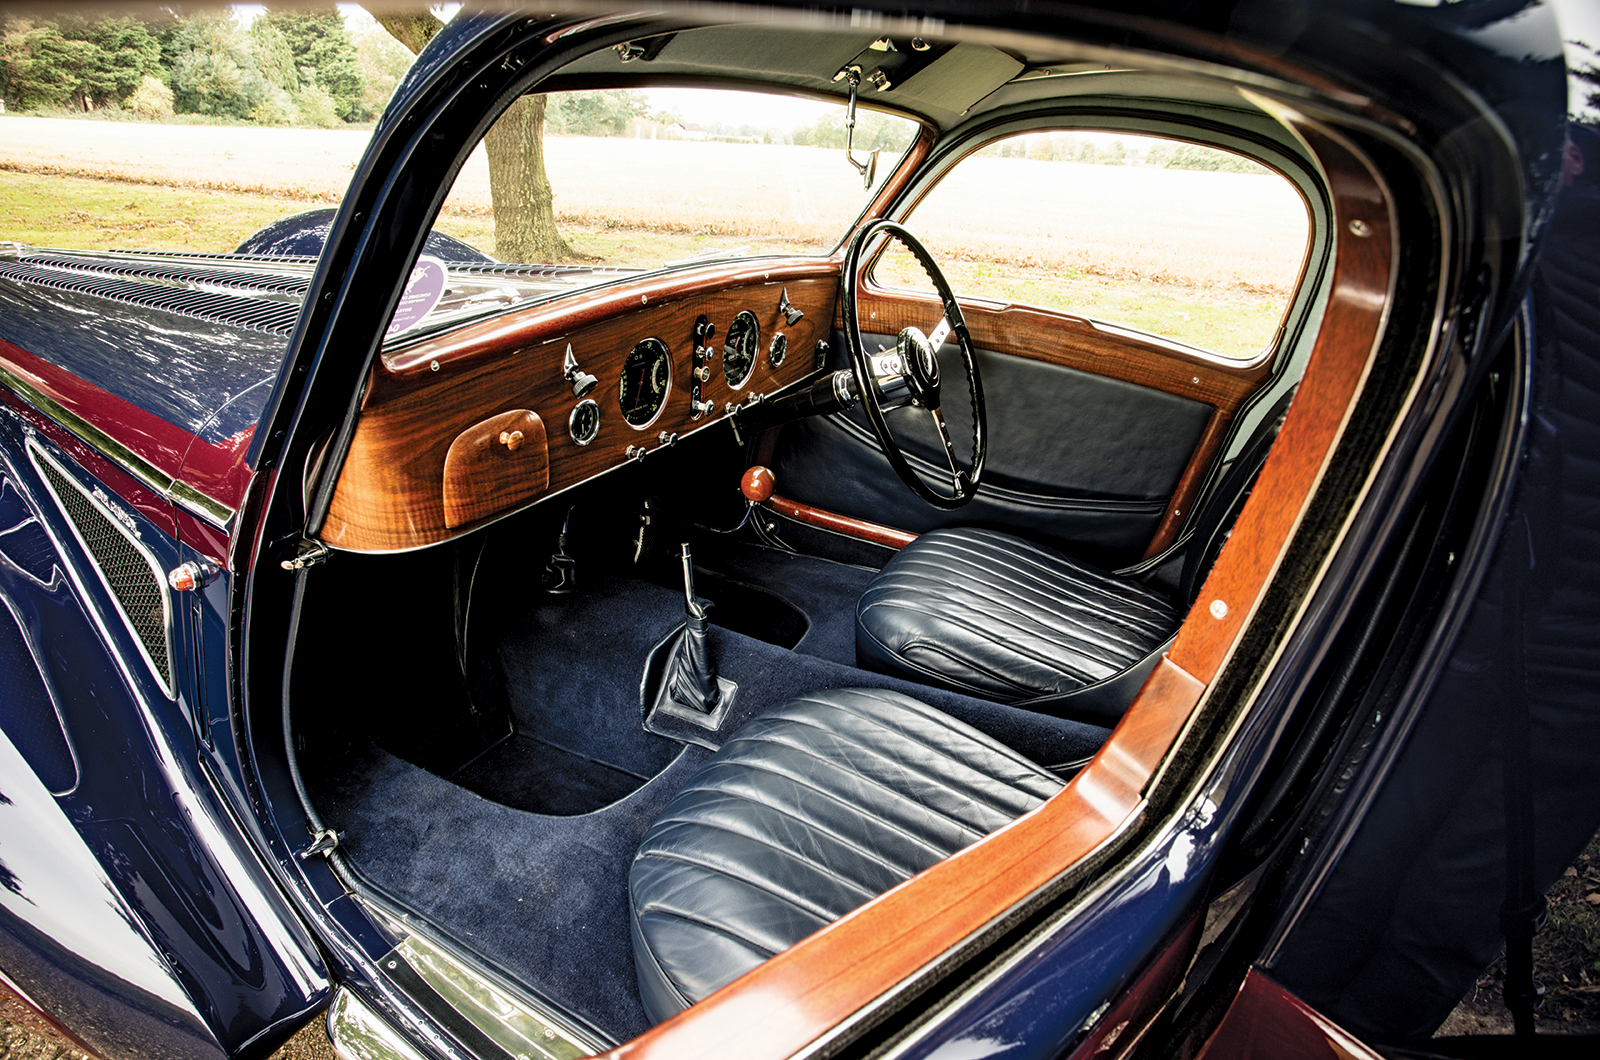 Classic & Sports Car – Delahaye Type 145: the retired racer turned chic coupé